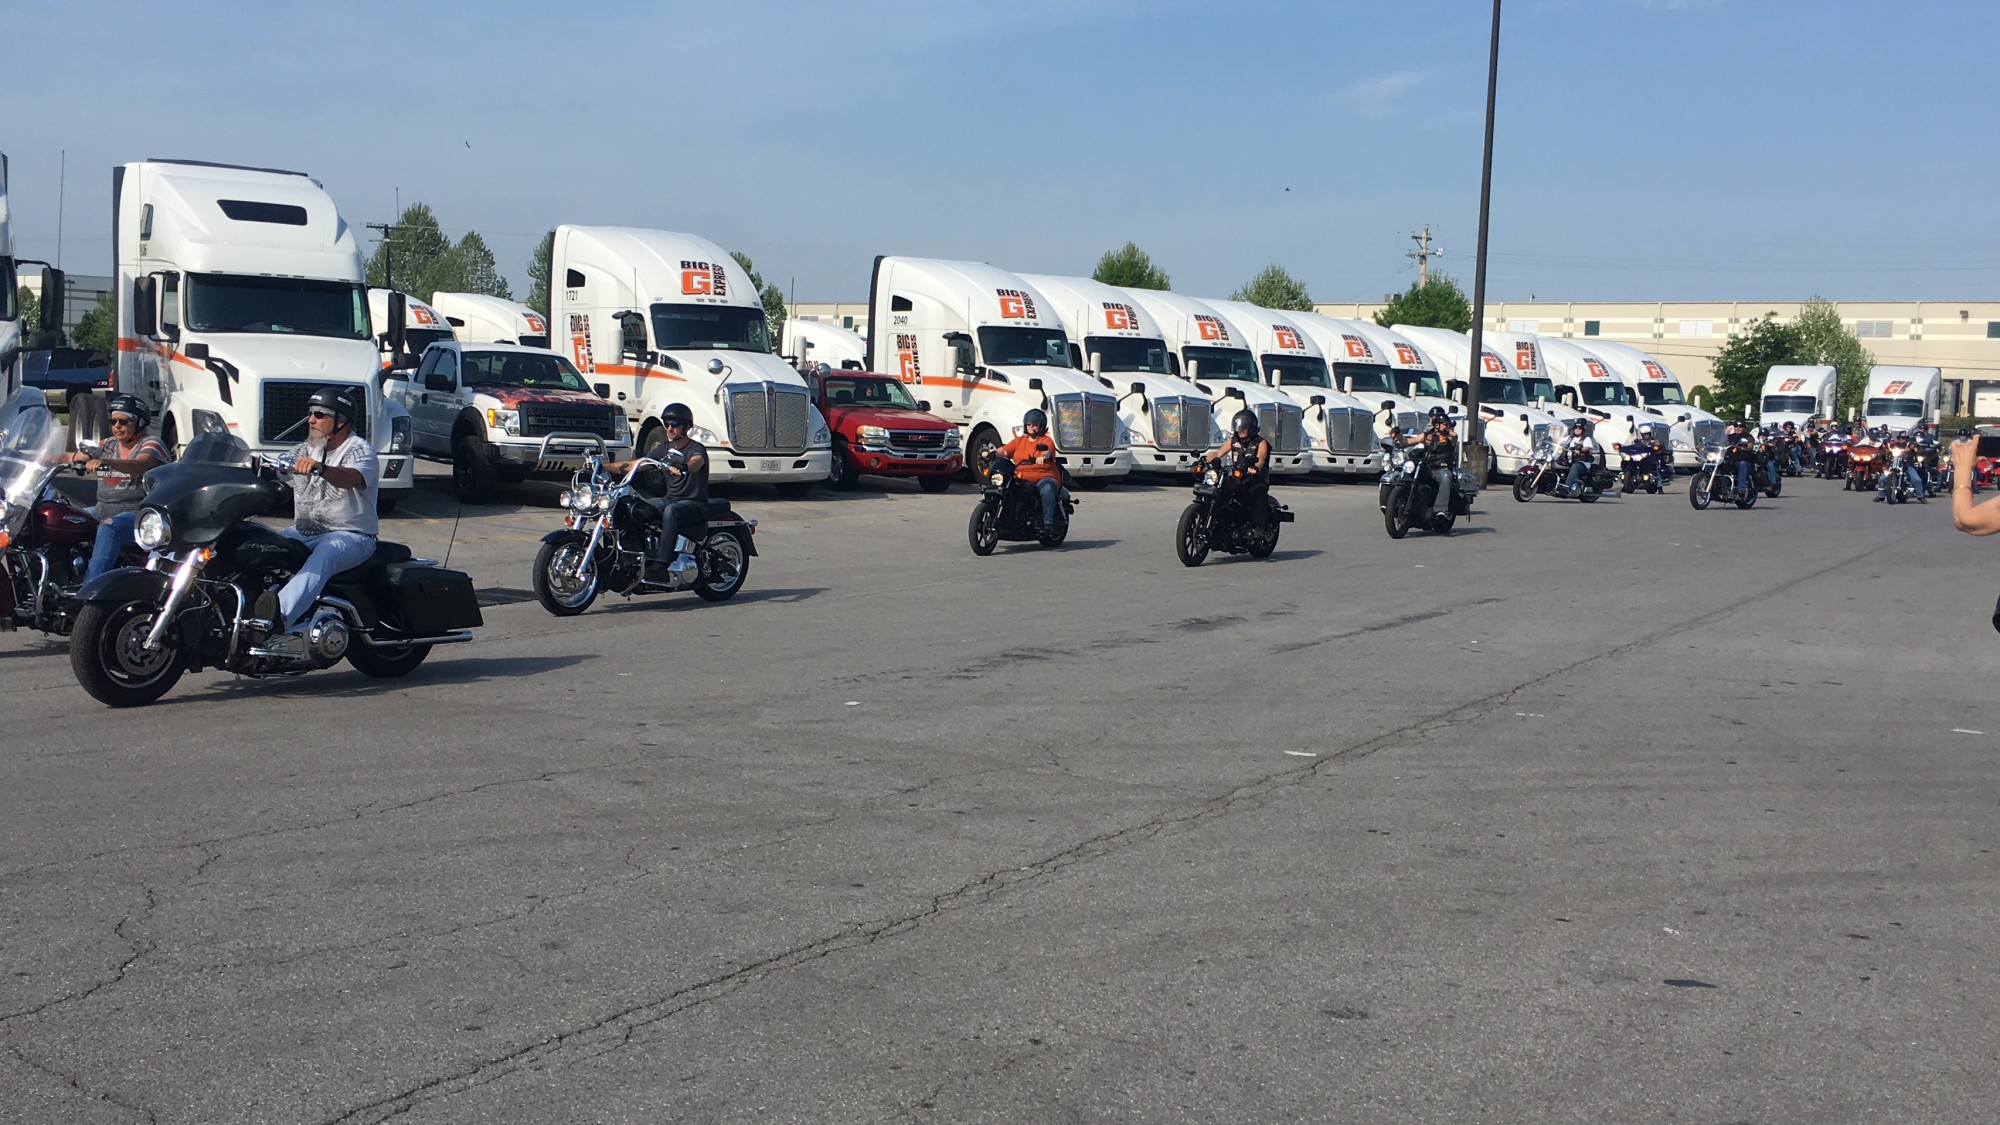 5th Annual Motorcycle Ride Benefiting St. Jude